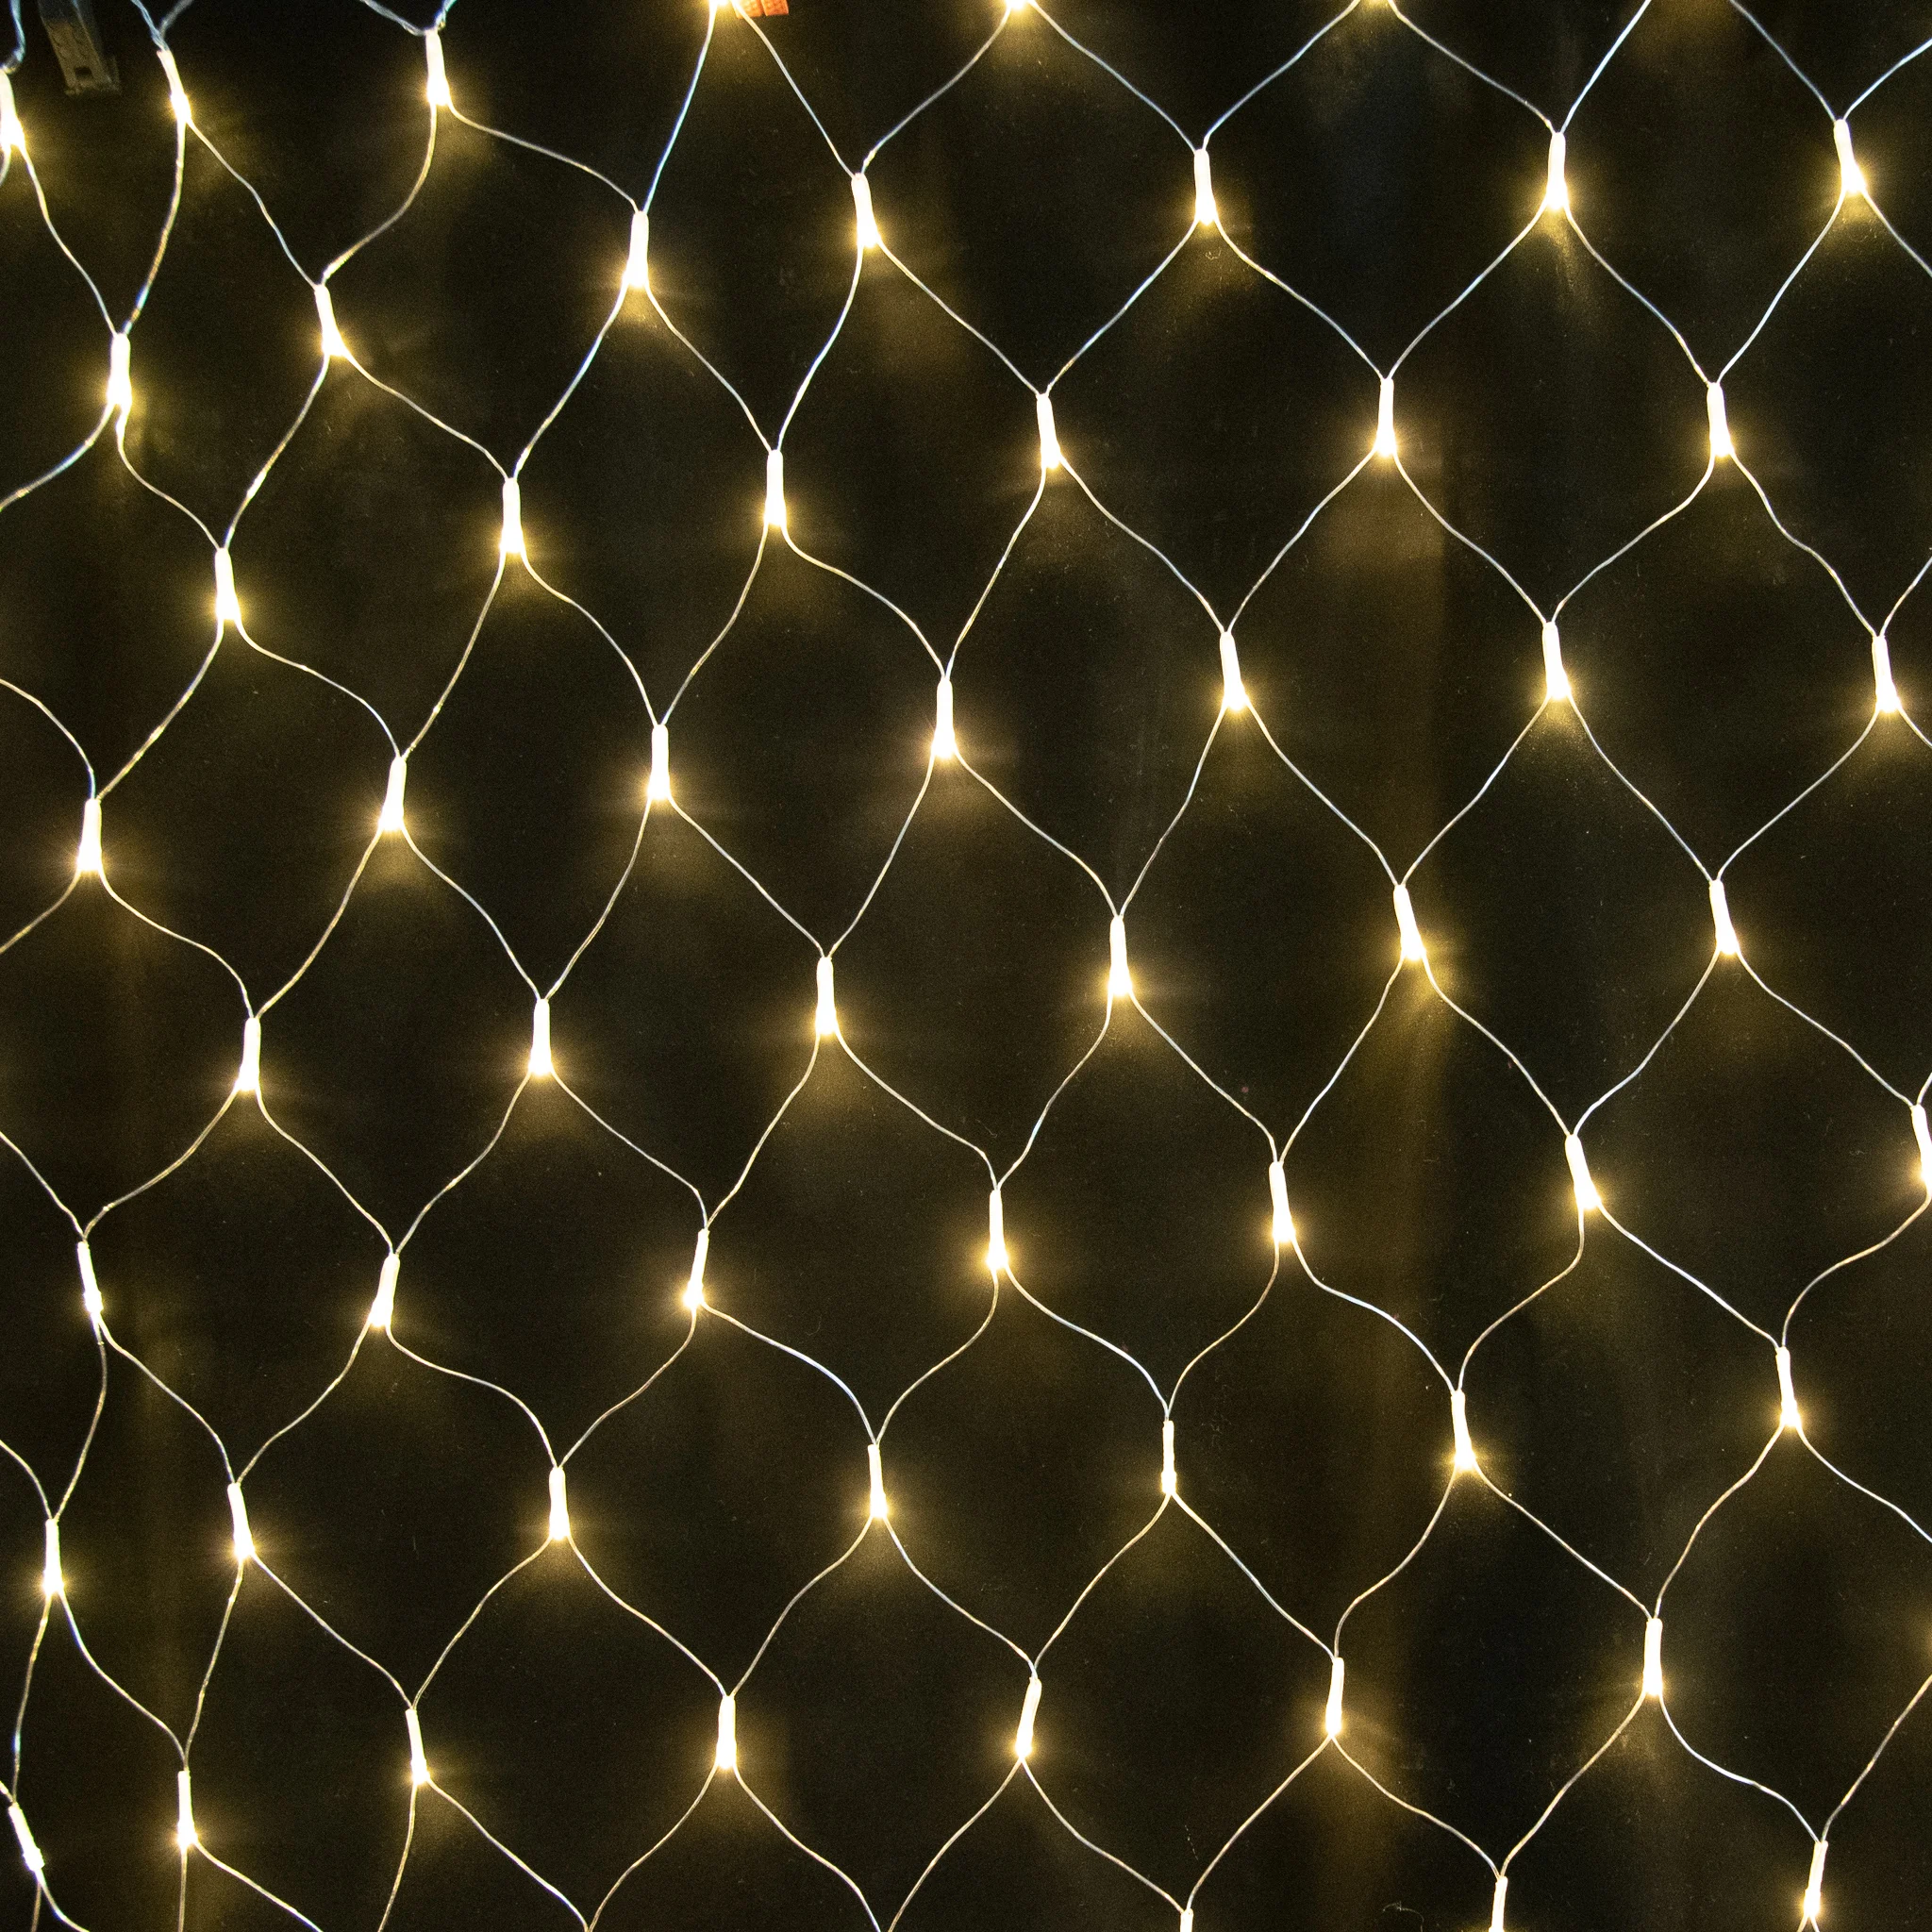 LED Net Mesh Fairy String Decorative Lights 200 LEDs 9.8ft x 6.6ft Tree-wrap Warm White Lights for Christmas Outdoor